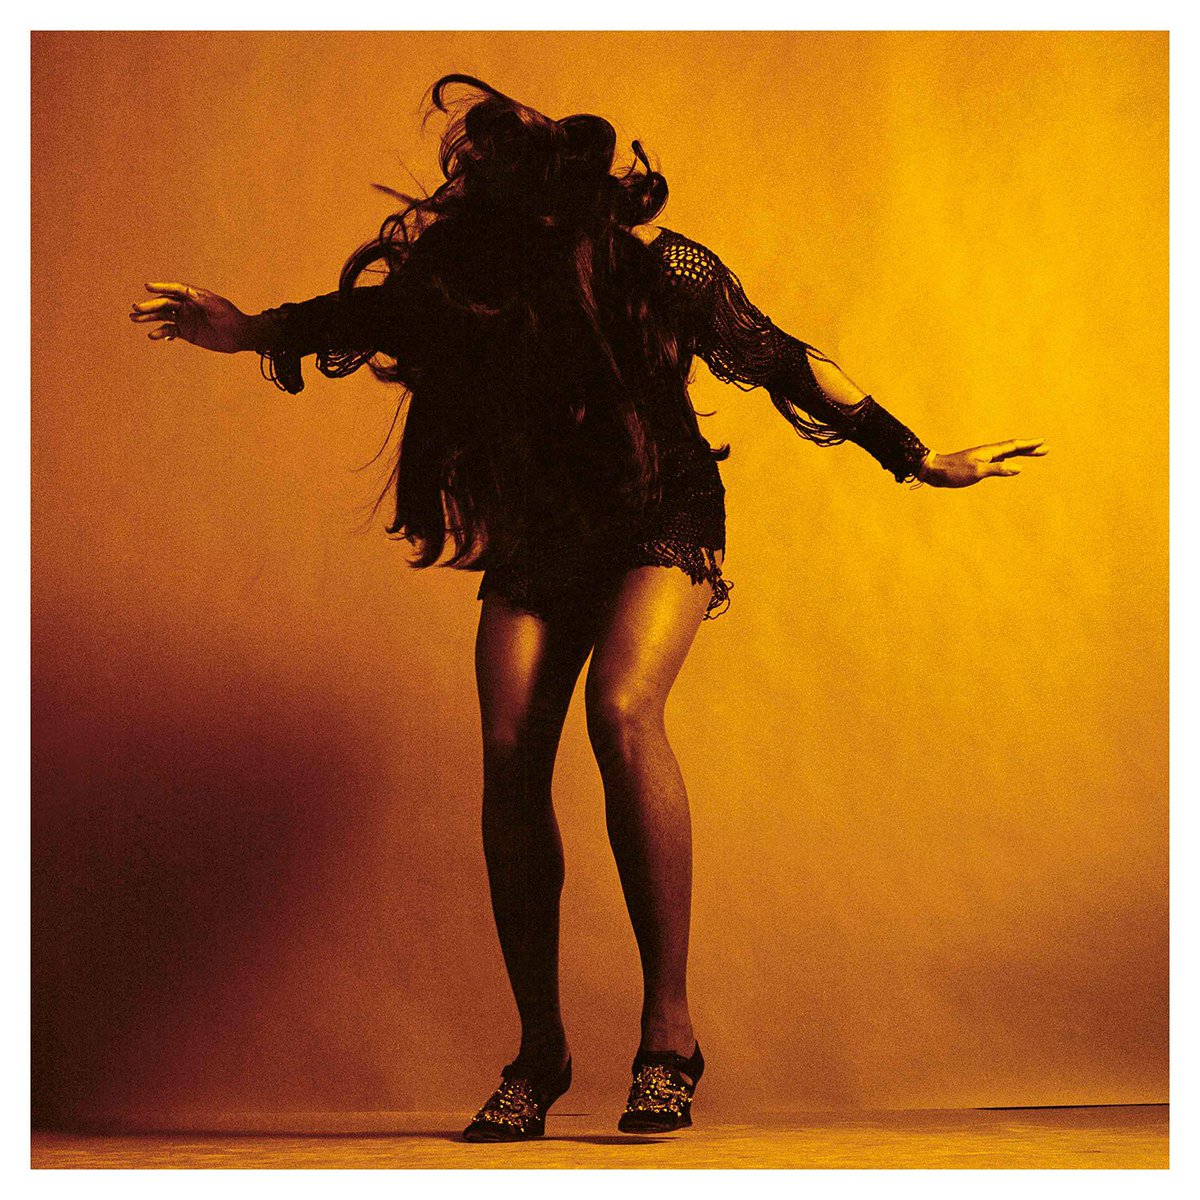 Jack's 1969 #TinaTurner photo wins #BestArtVinyl 2016 for #TheLastShadowPuppets' Everything You've Come to Expect goo.gl/xxh8VK